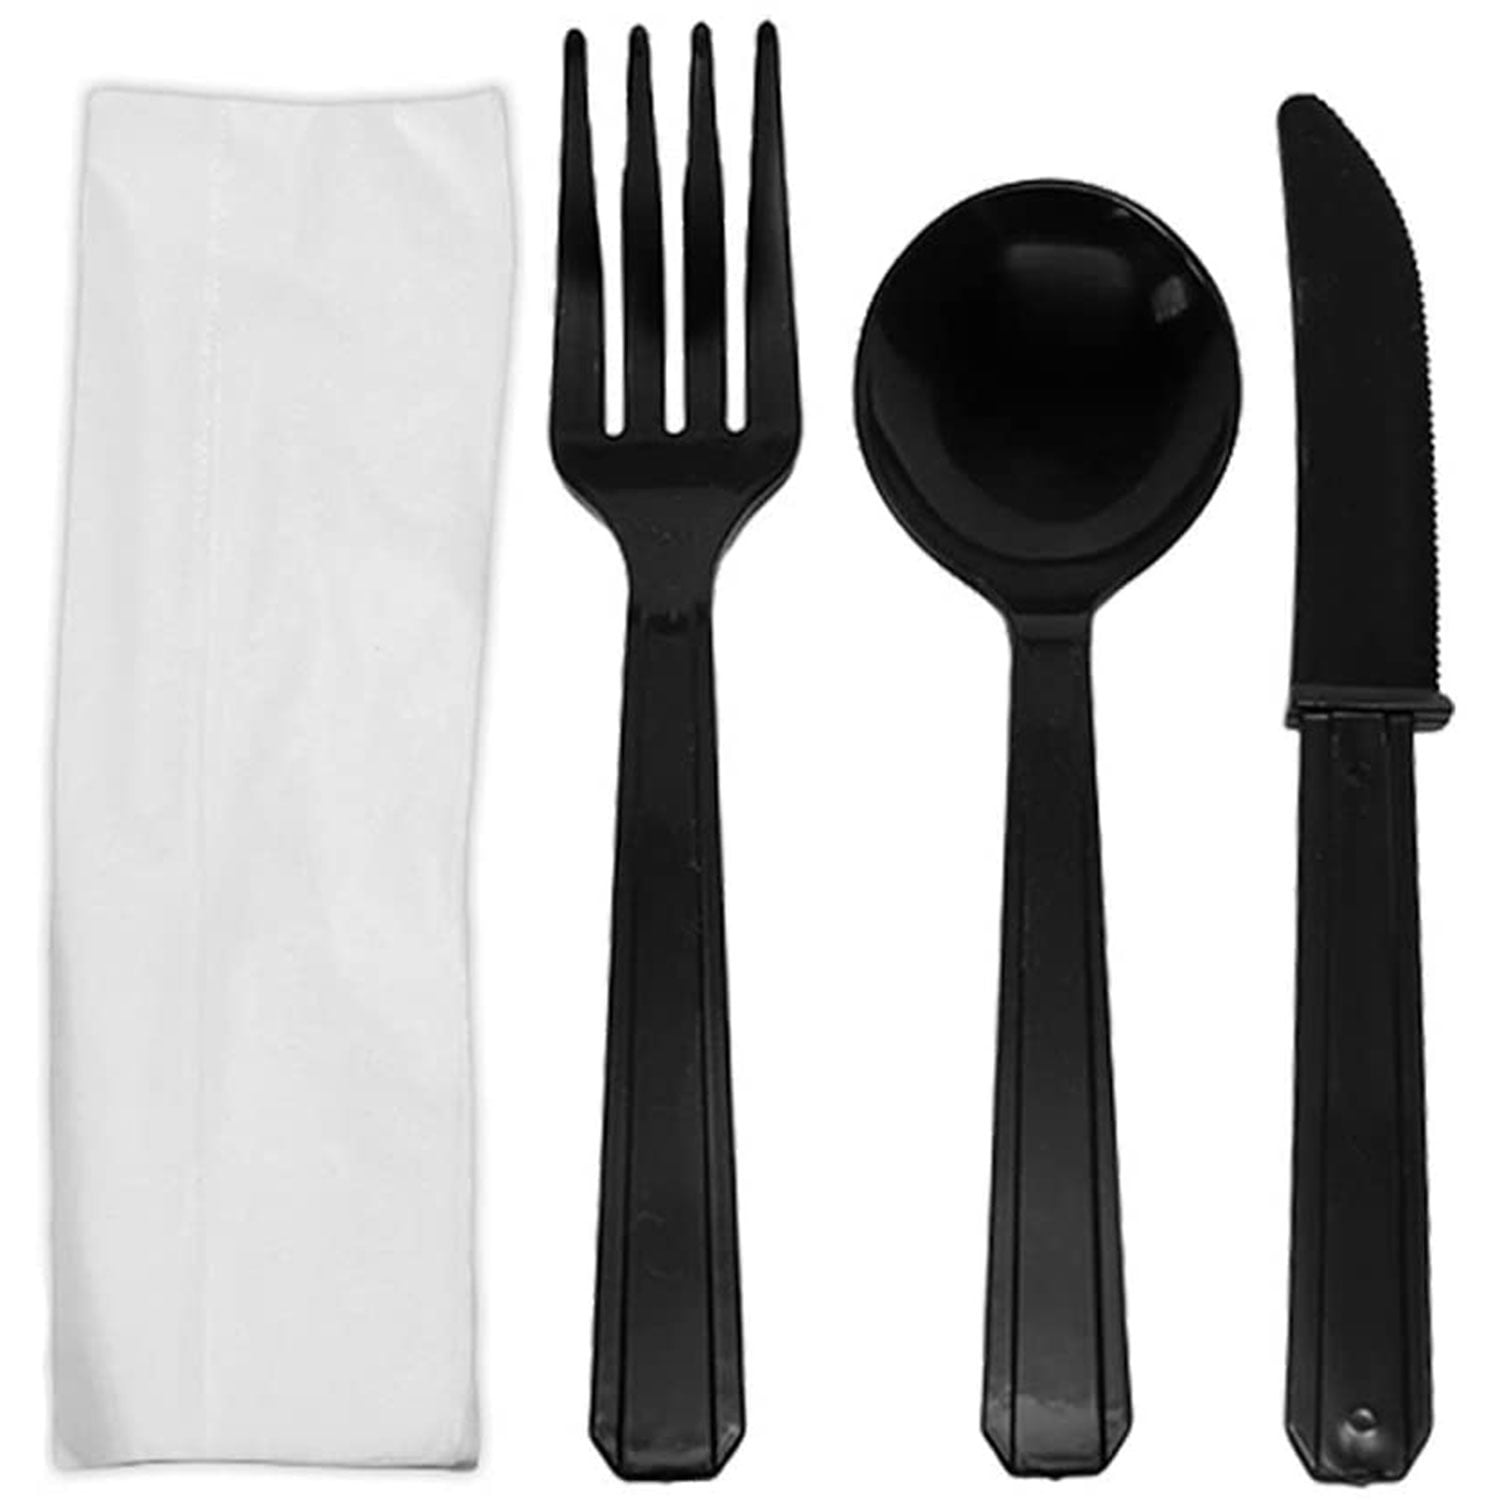 HeavyWeight Disposable Plastic Cutlery Forks - Black, 250 